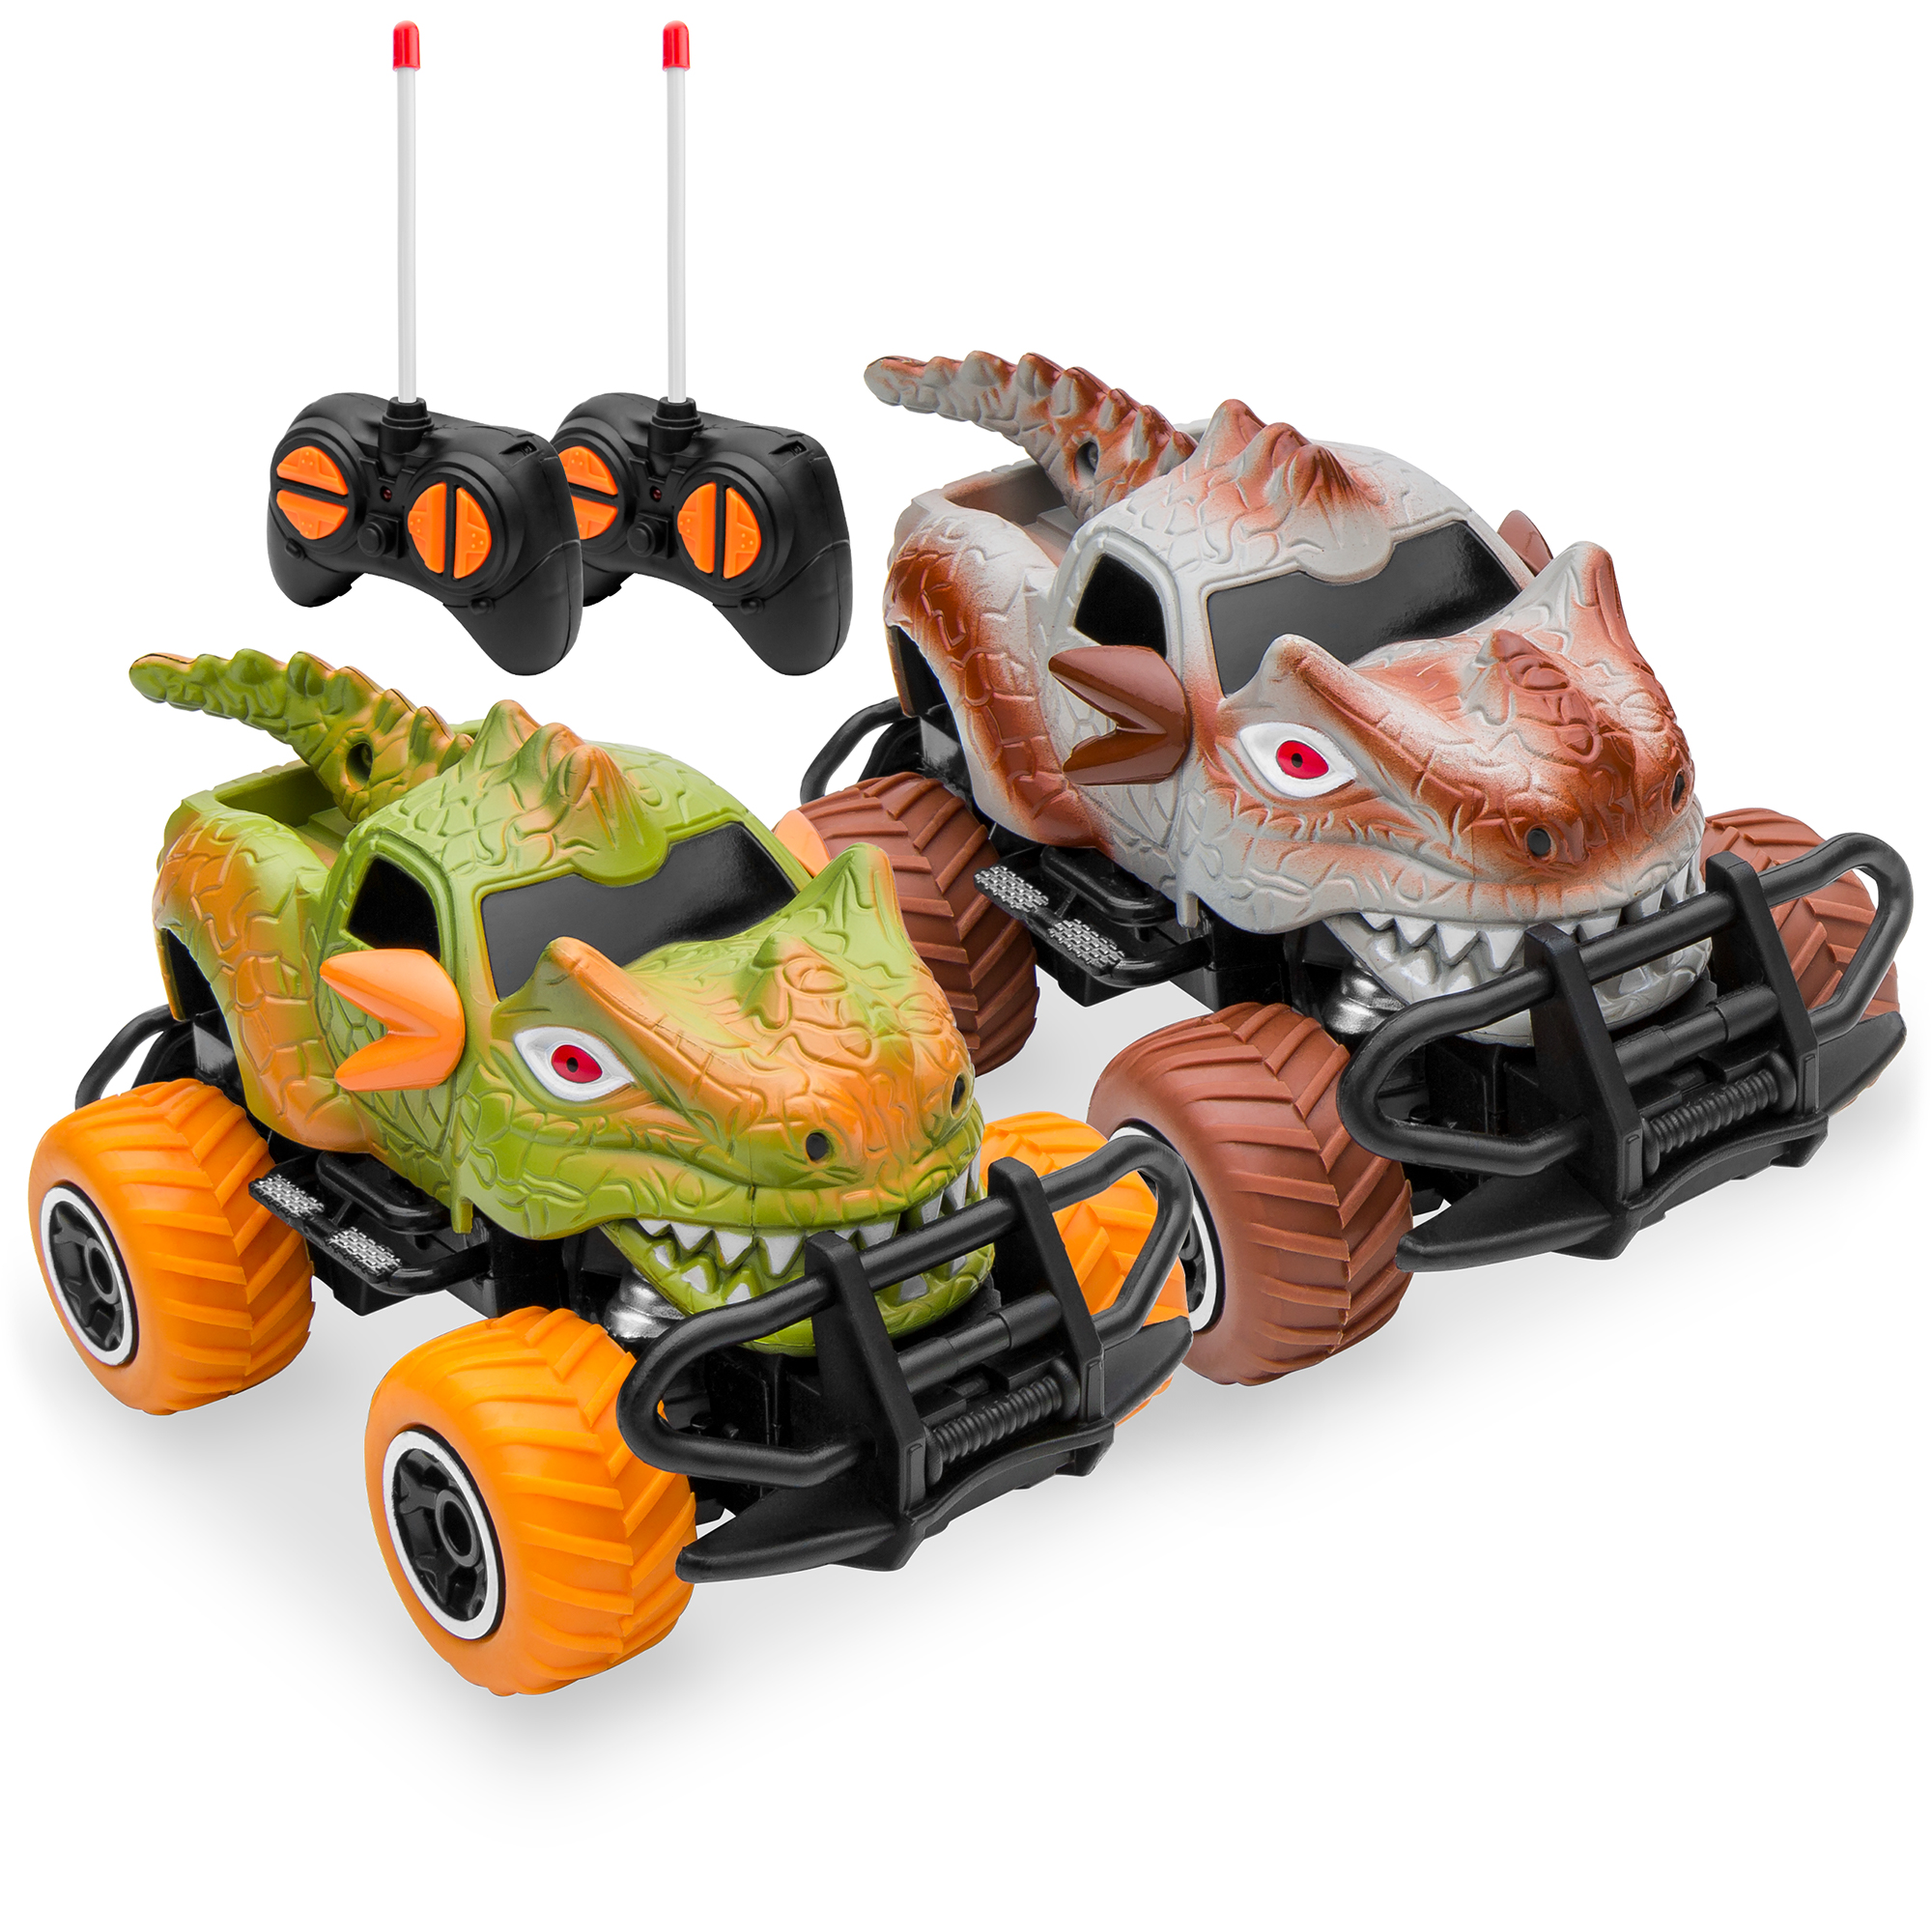 Best Choice Products Set of 2 1/43 Scale 27MHz Toy Dinosaur RC Cars w/ 2 Controllers, 9mph Max Speed - image 1 of 8